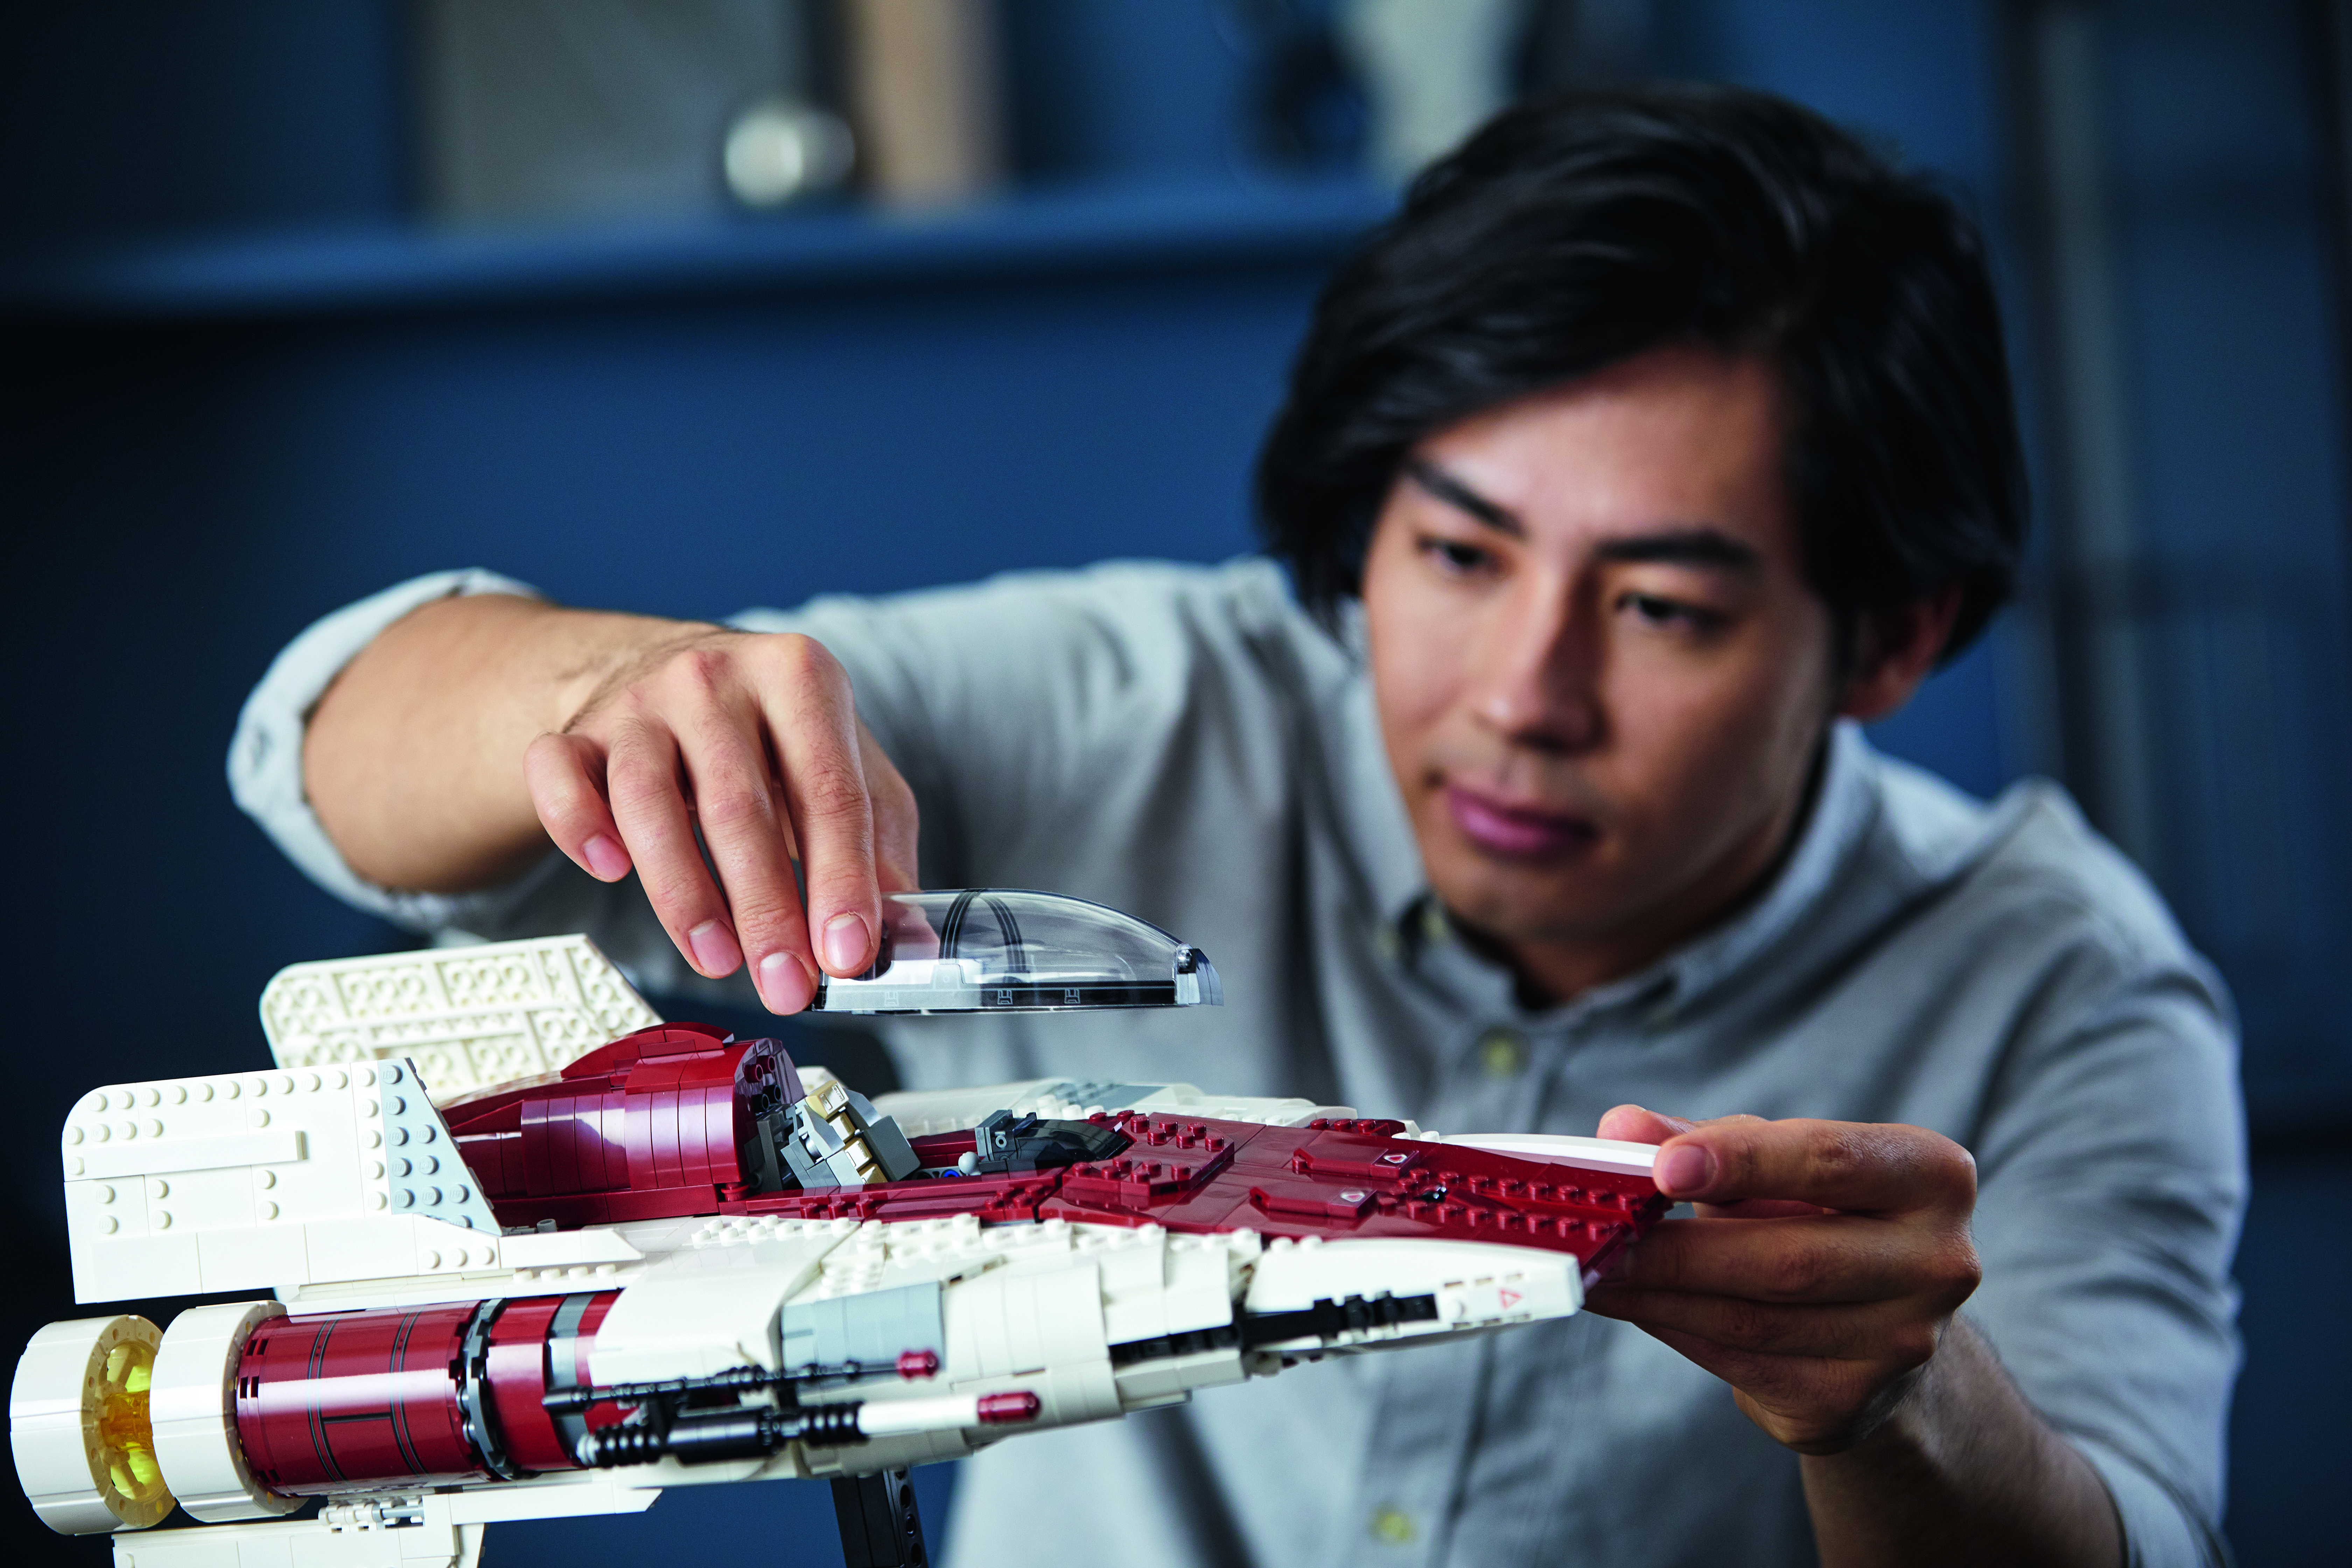 LEGO A-Wing